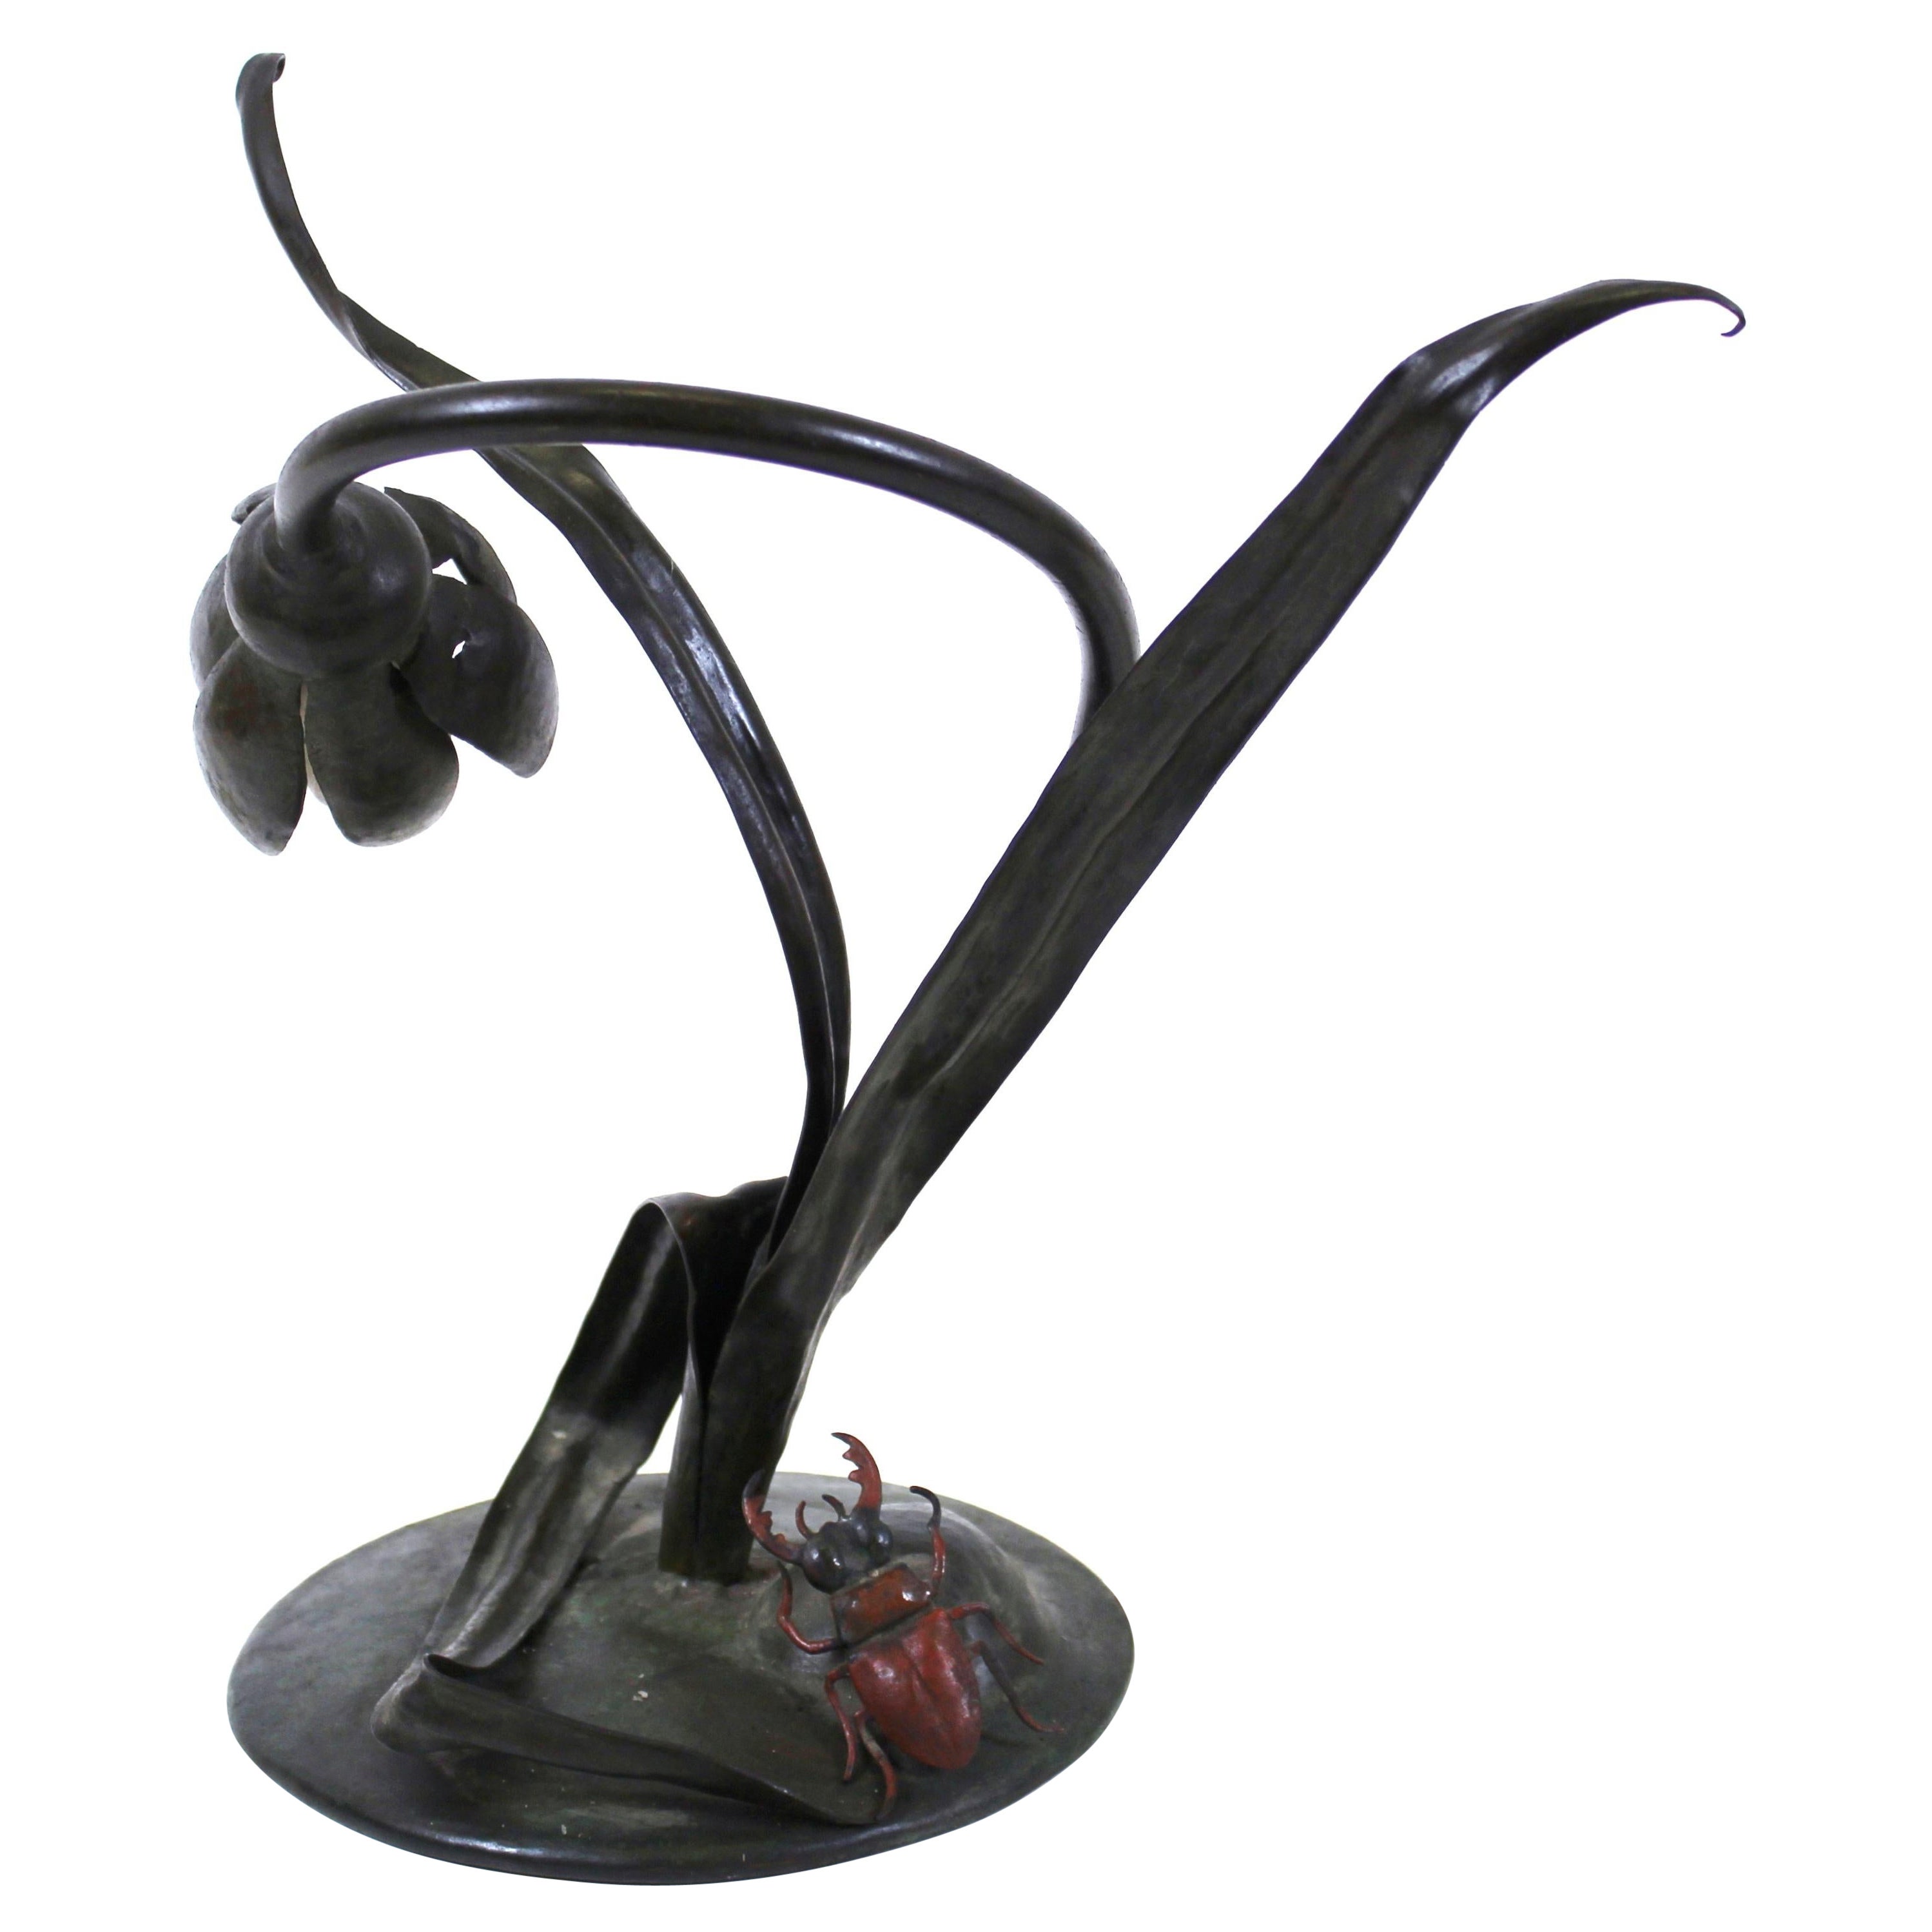 Japanese Art Nouveau Floral Table Lamp with Beetle Light Switch